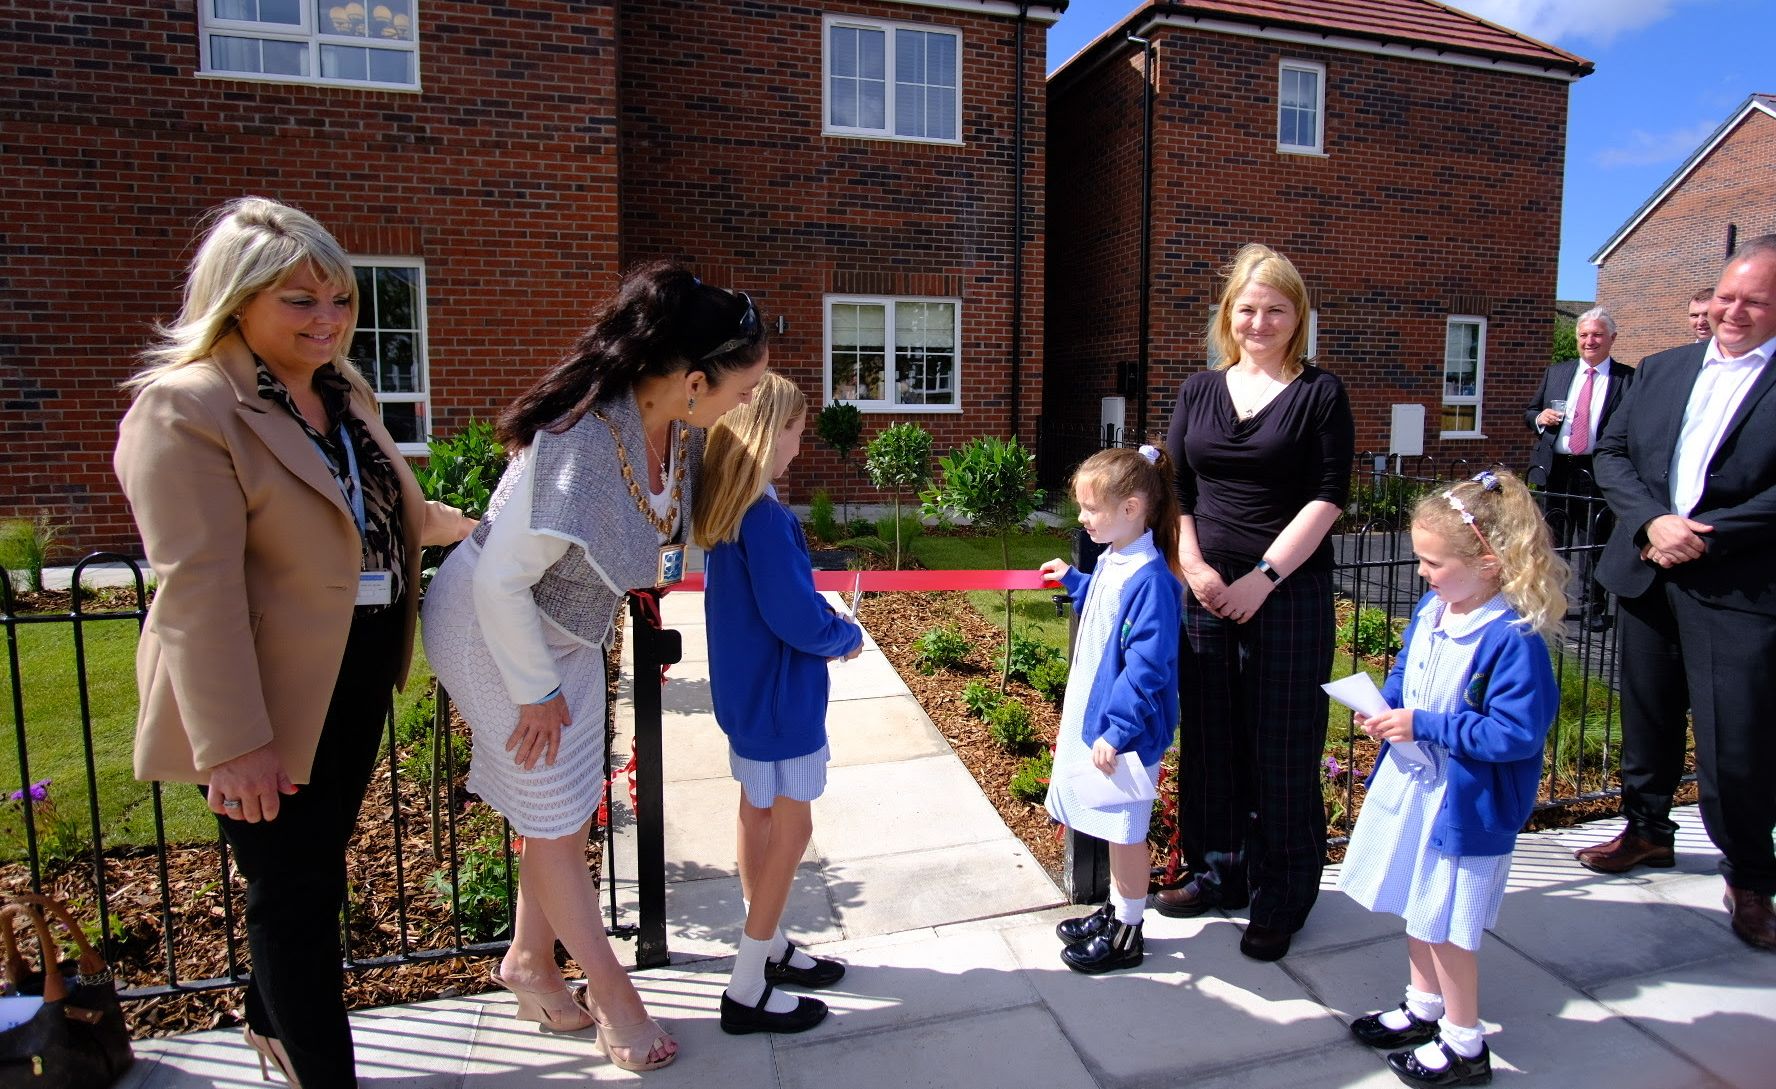 Children from local primary school Kew Woods joined dignitaries to celebrate the launch of Sandway Homes flagship housing development at Sandybrook in Ainsdale in Southport